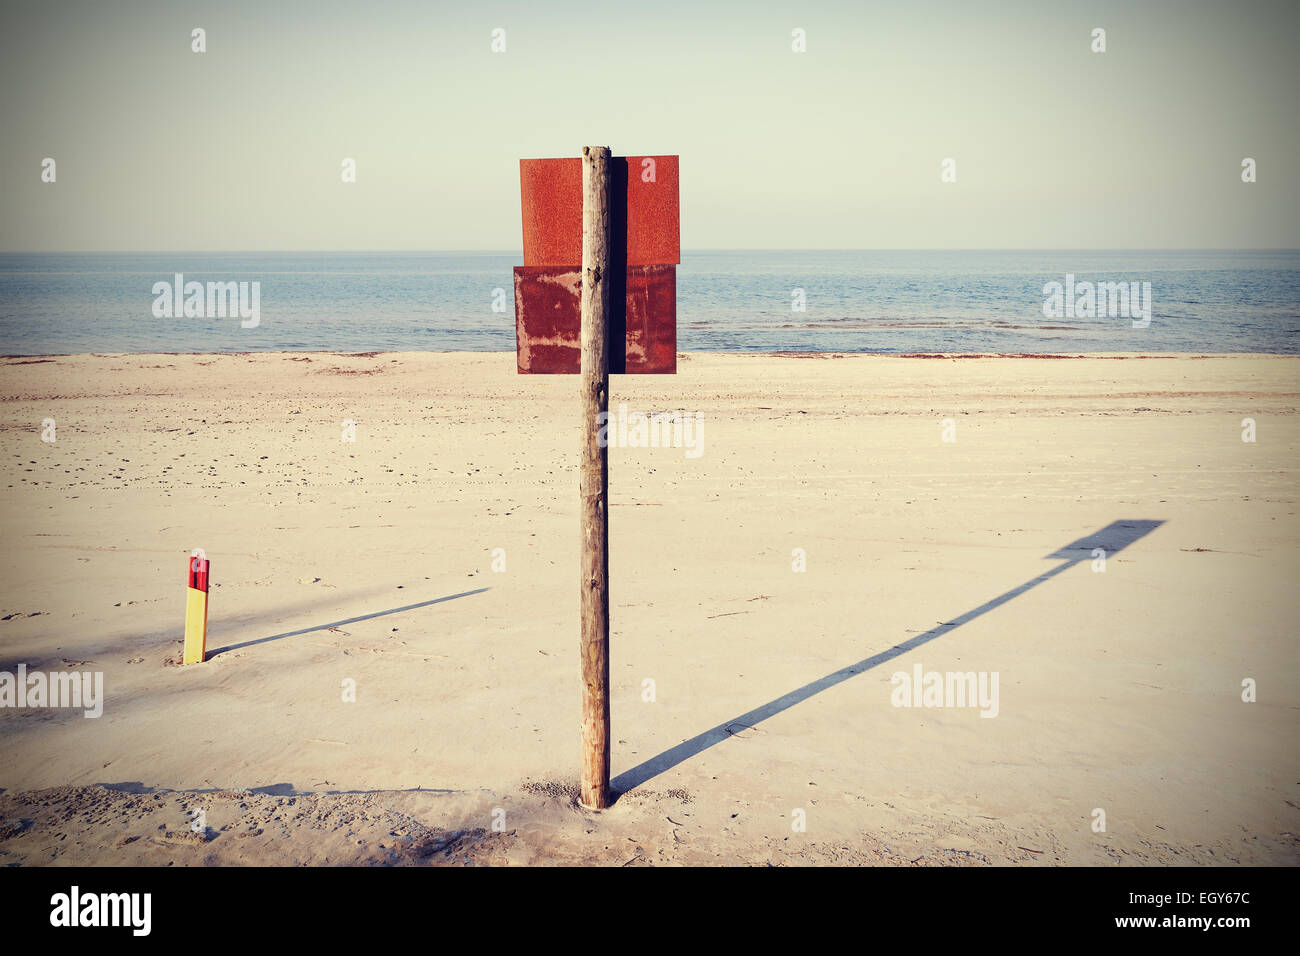 Retro filtered rusty board sign on wooden post on a beach. Stock Photo